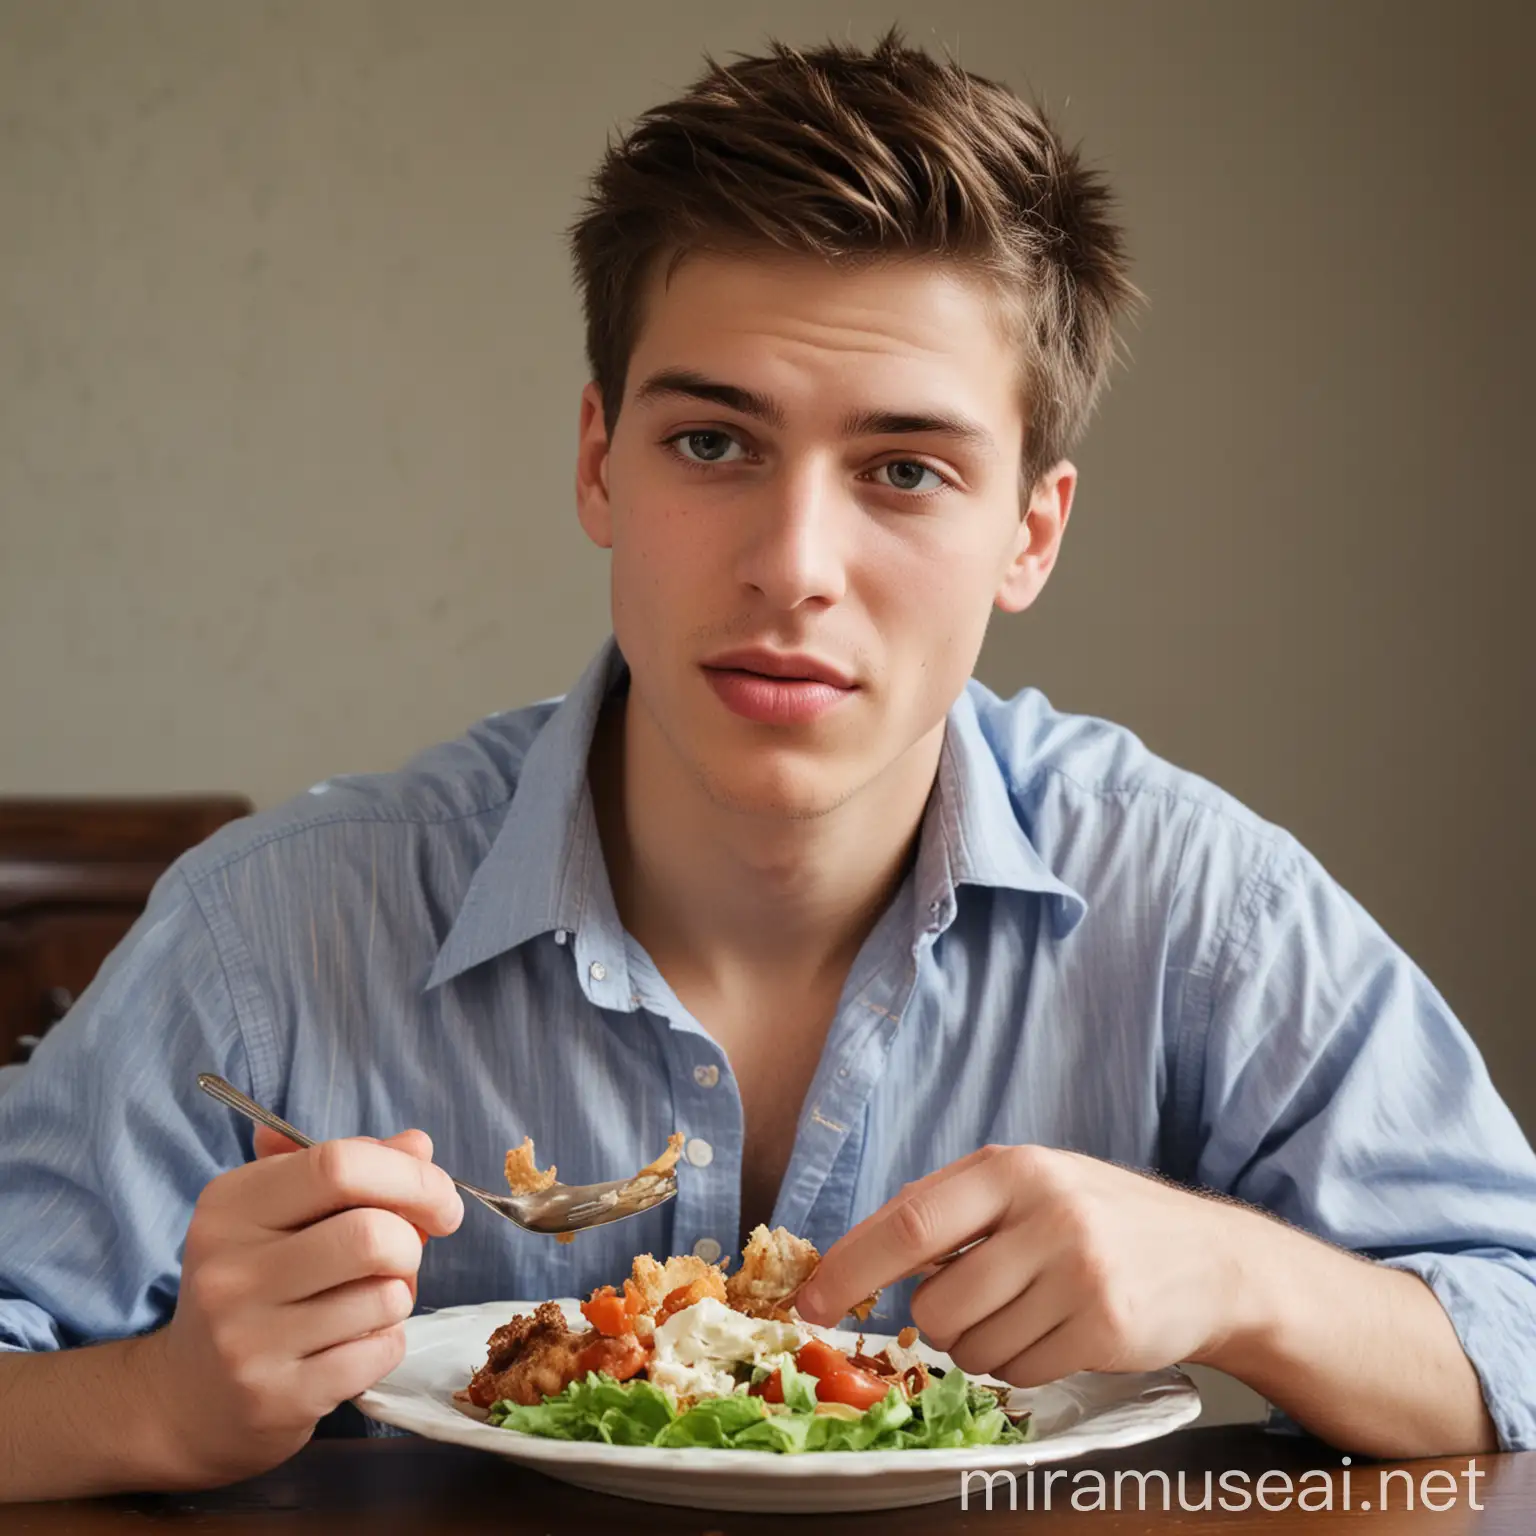 Young Man Enjoying a Delicious Meal